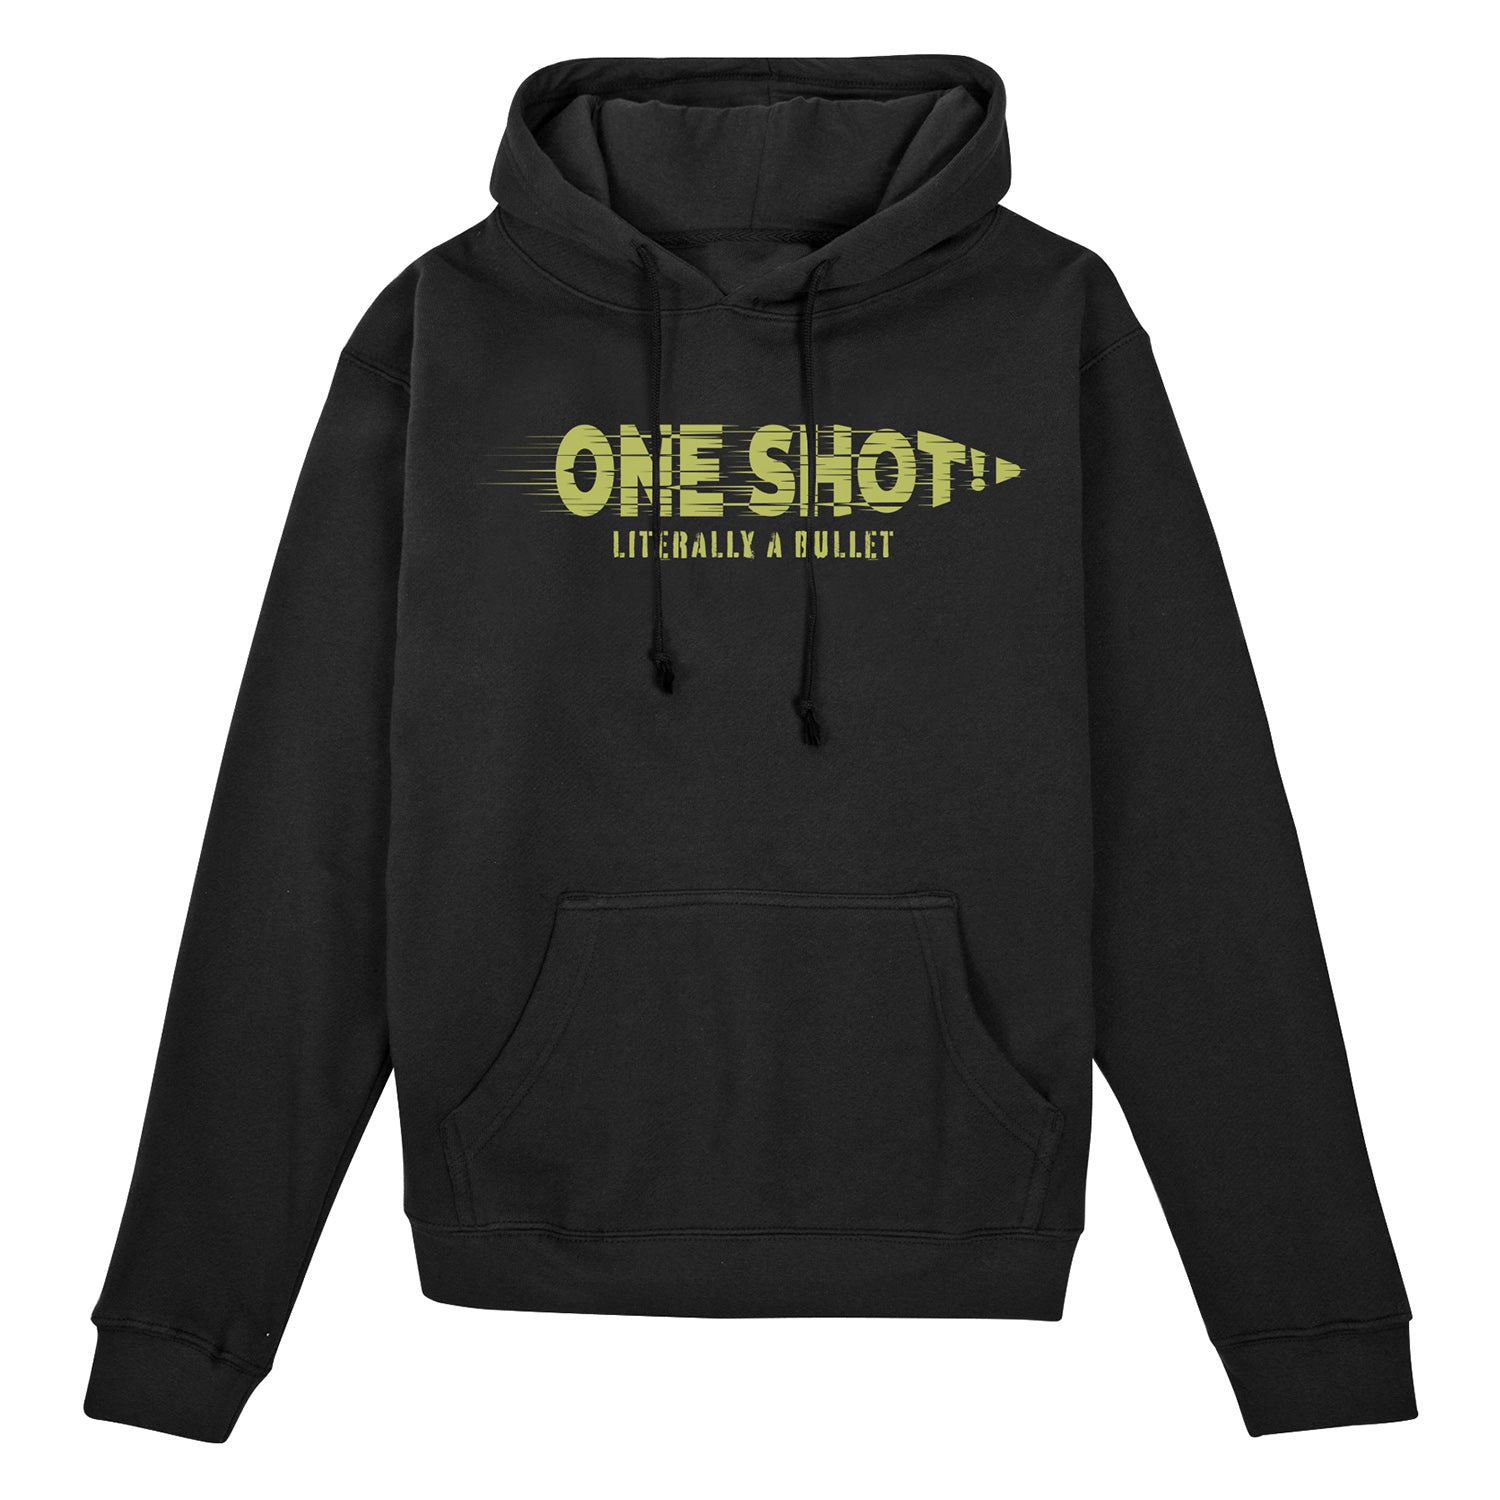 Call of Duty Black One Shot Hoodie - Front View